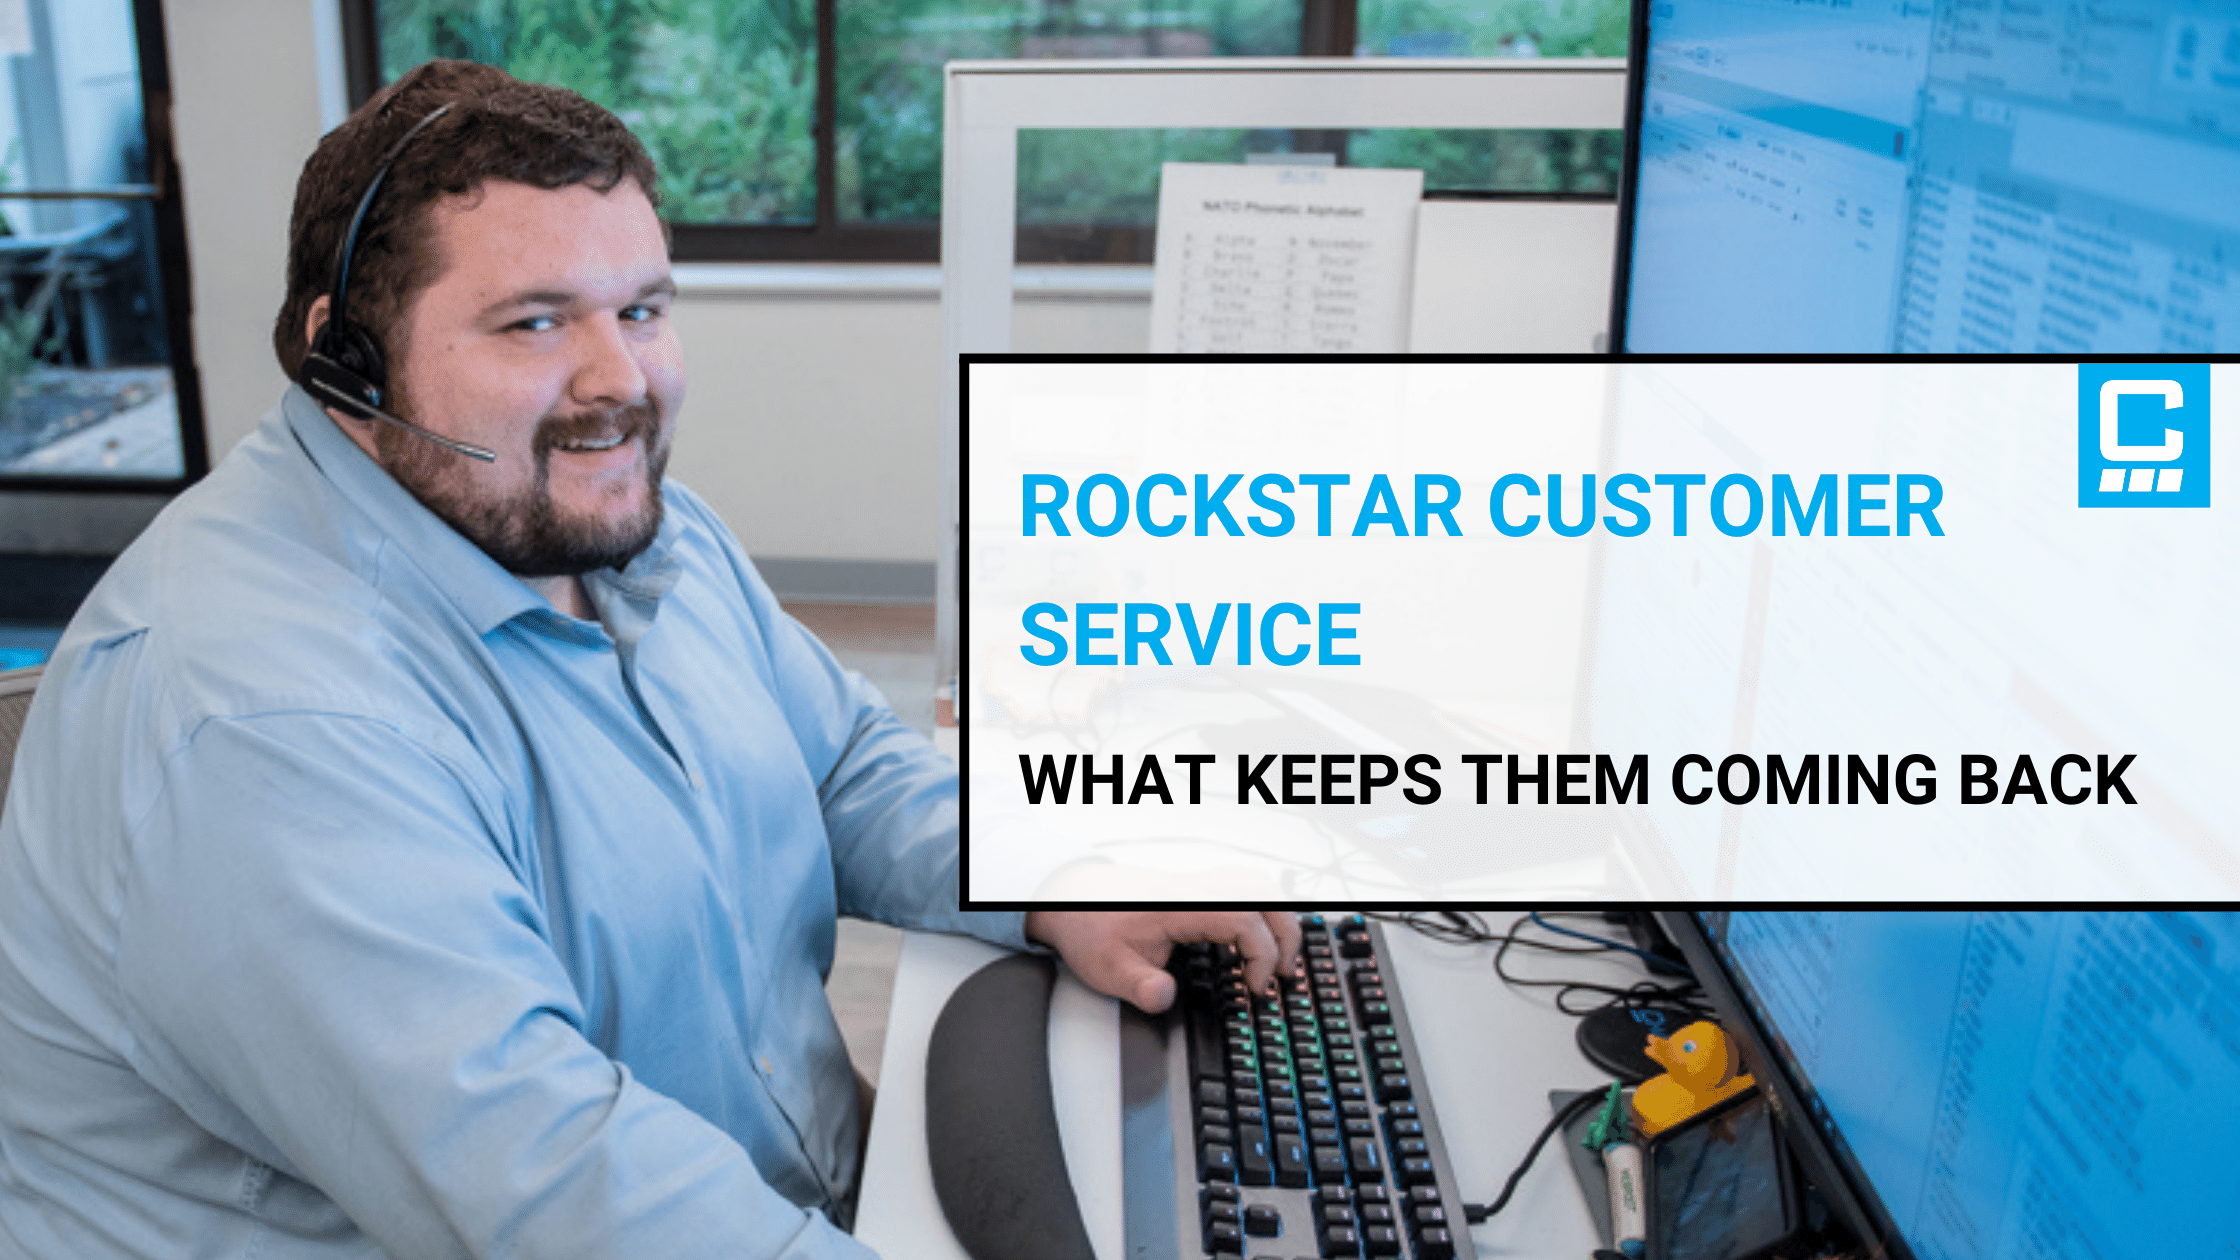 Rockstar Customer Service: What Keeps Them Coming Back